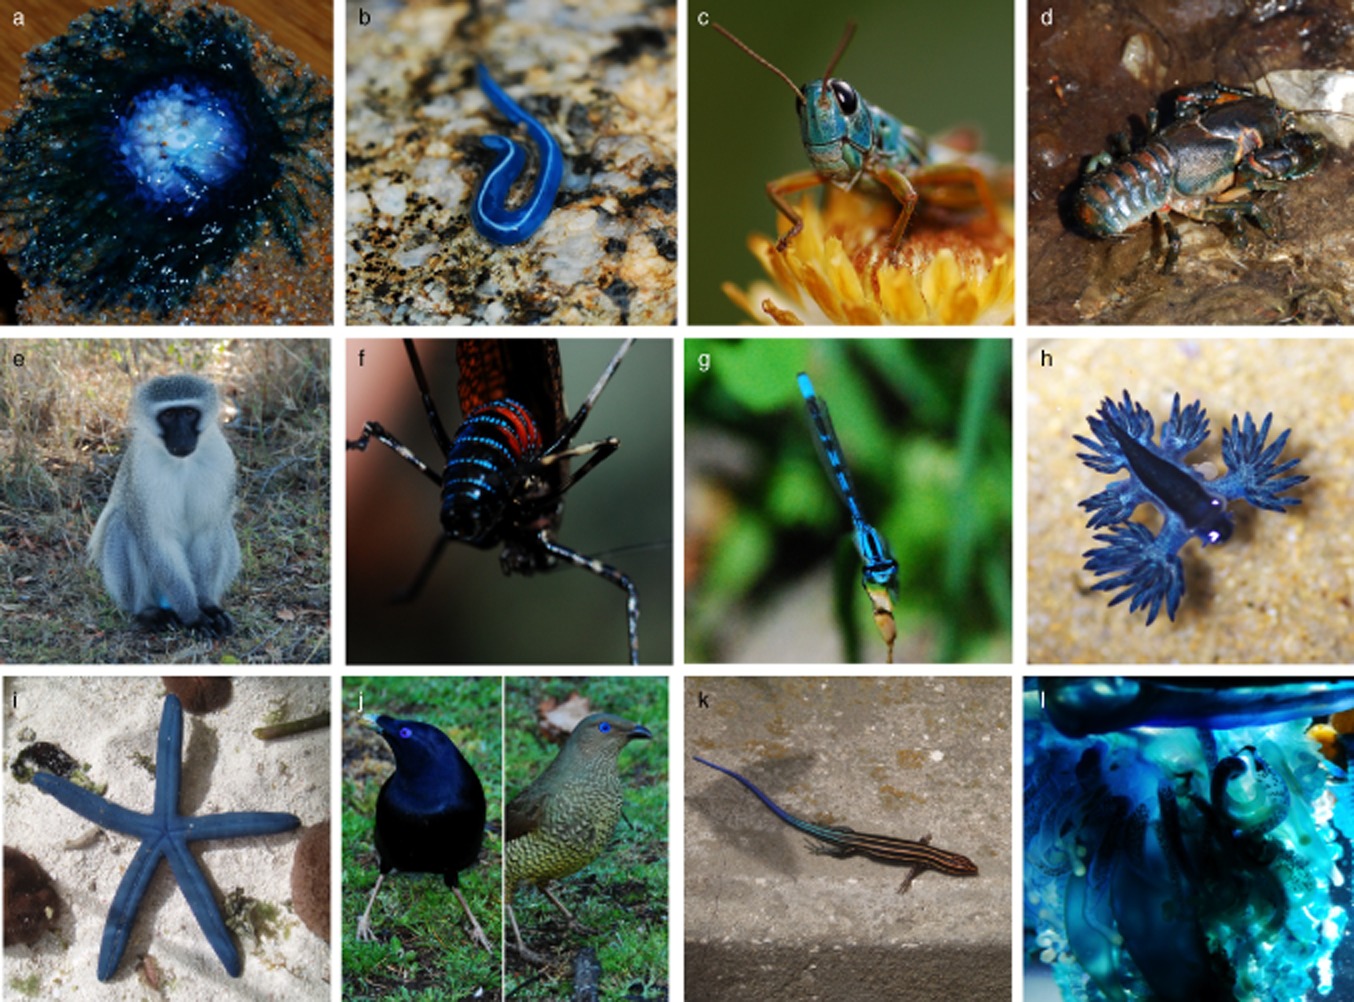 Examples of blue colouration in animals, Umbers K., 2012